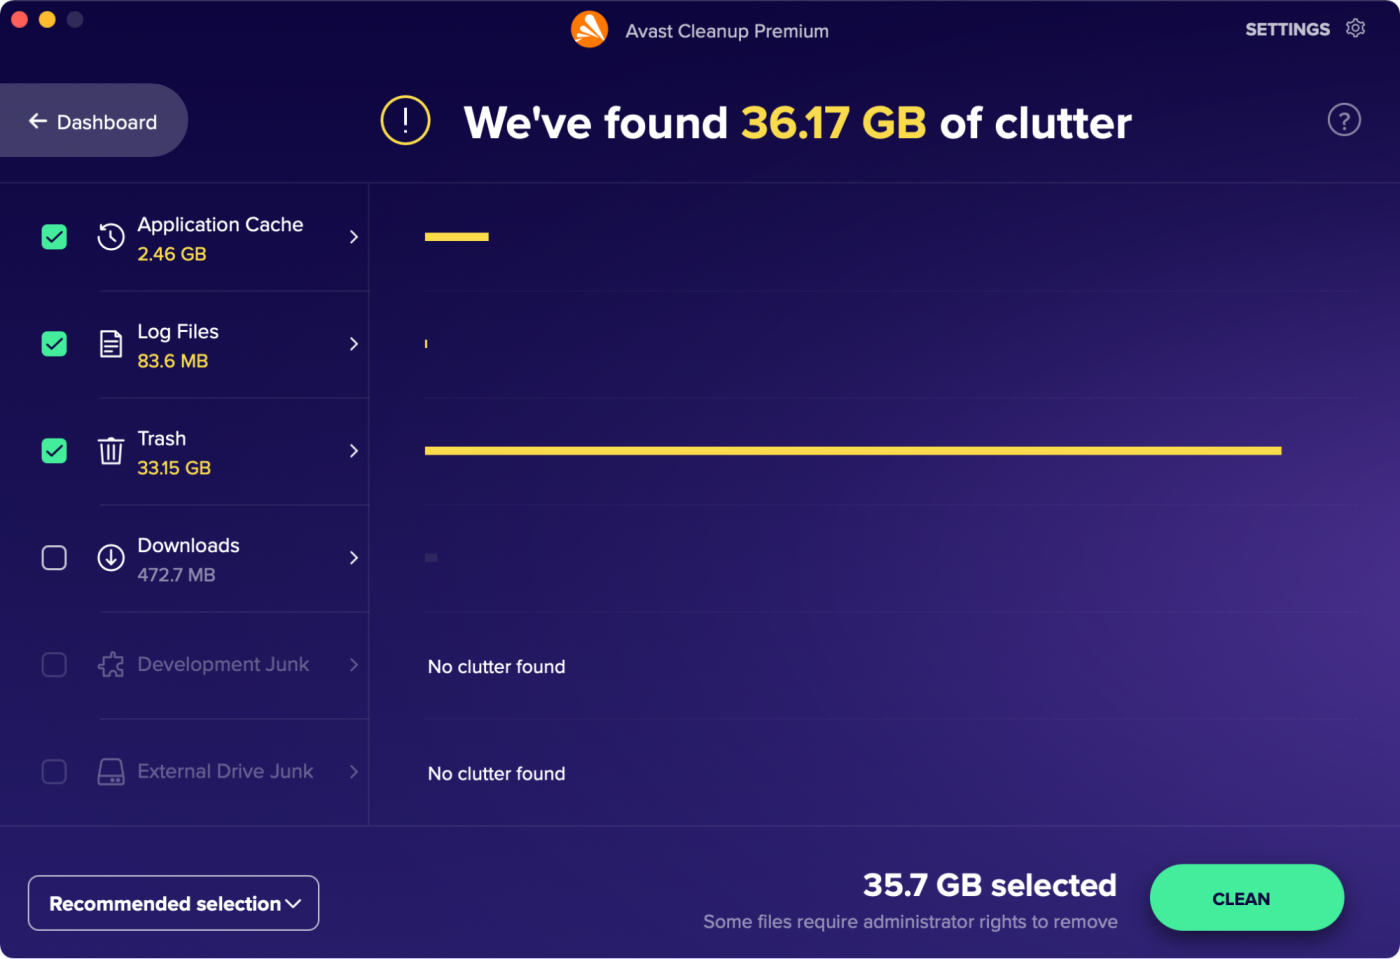 The Clean clutter option on Avast Cleaner for clearing up disk space on your Mac